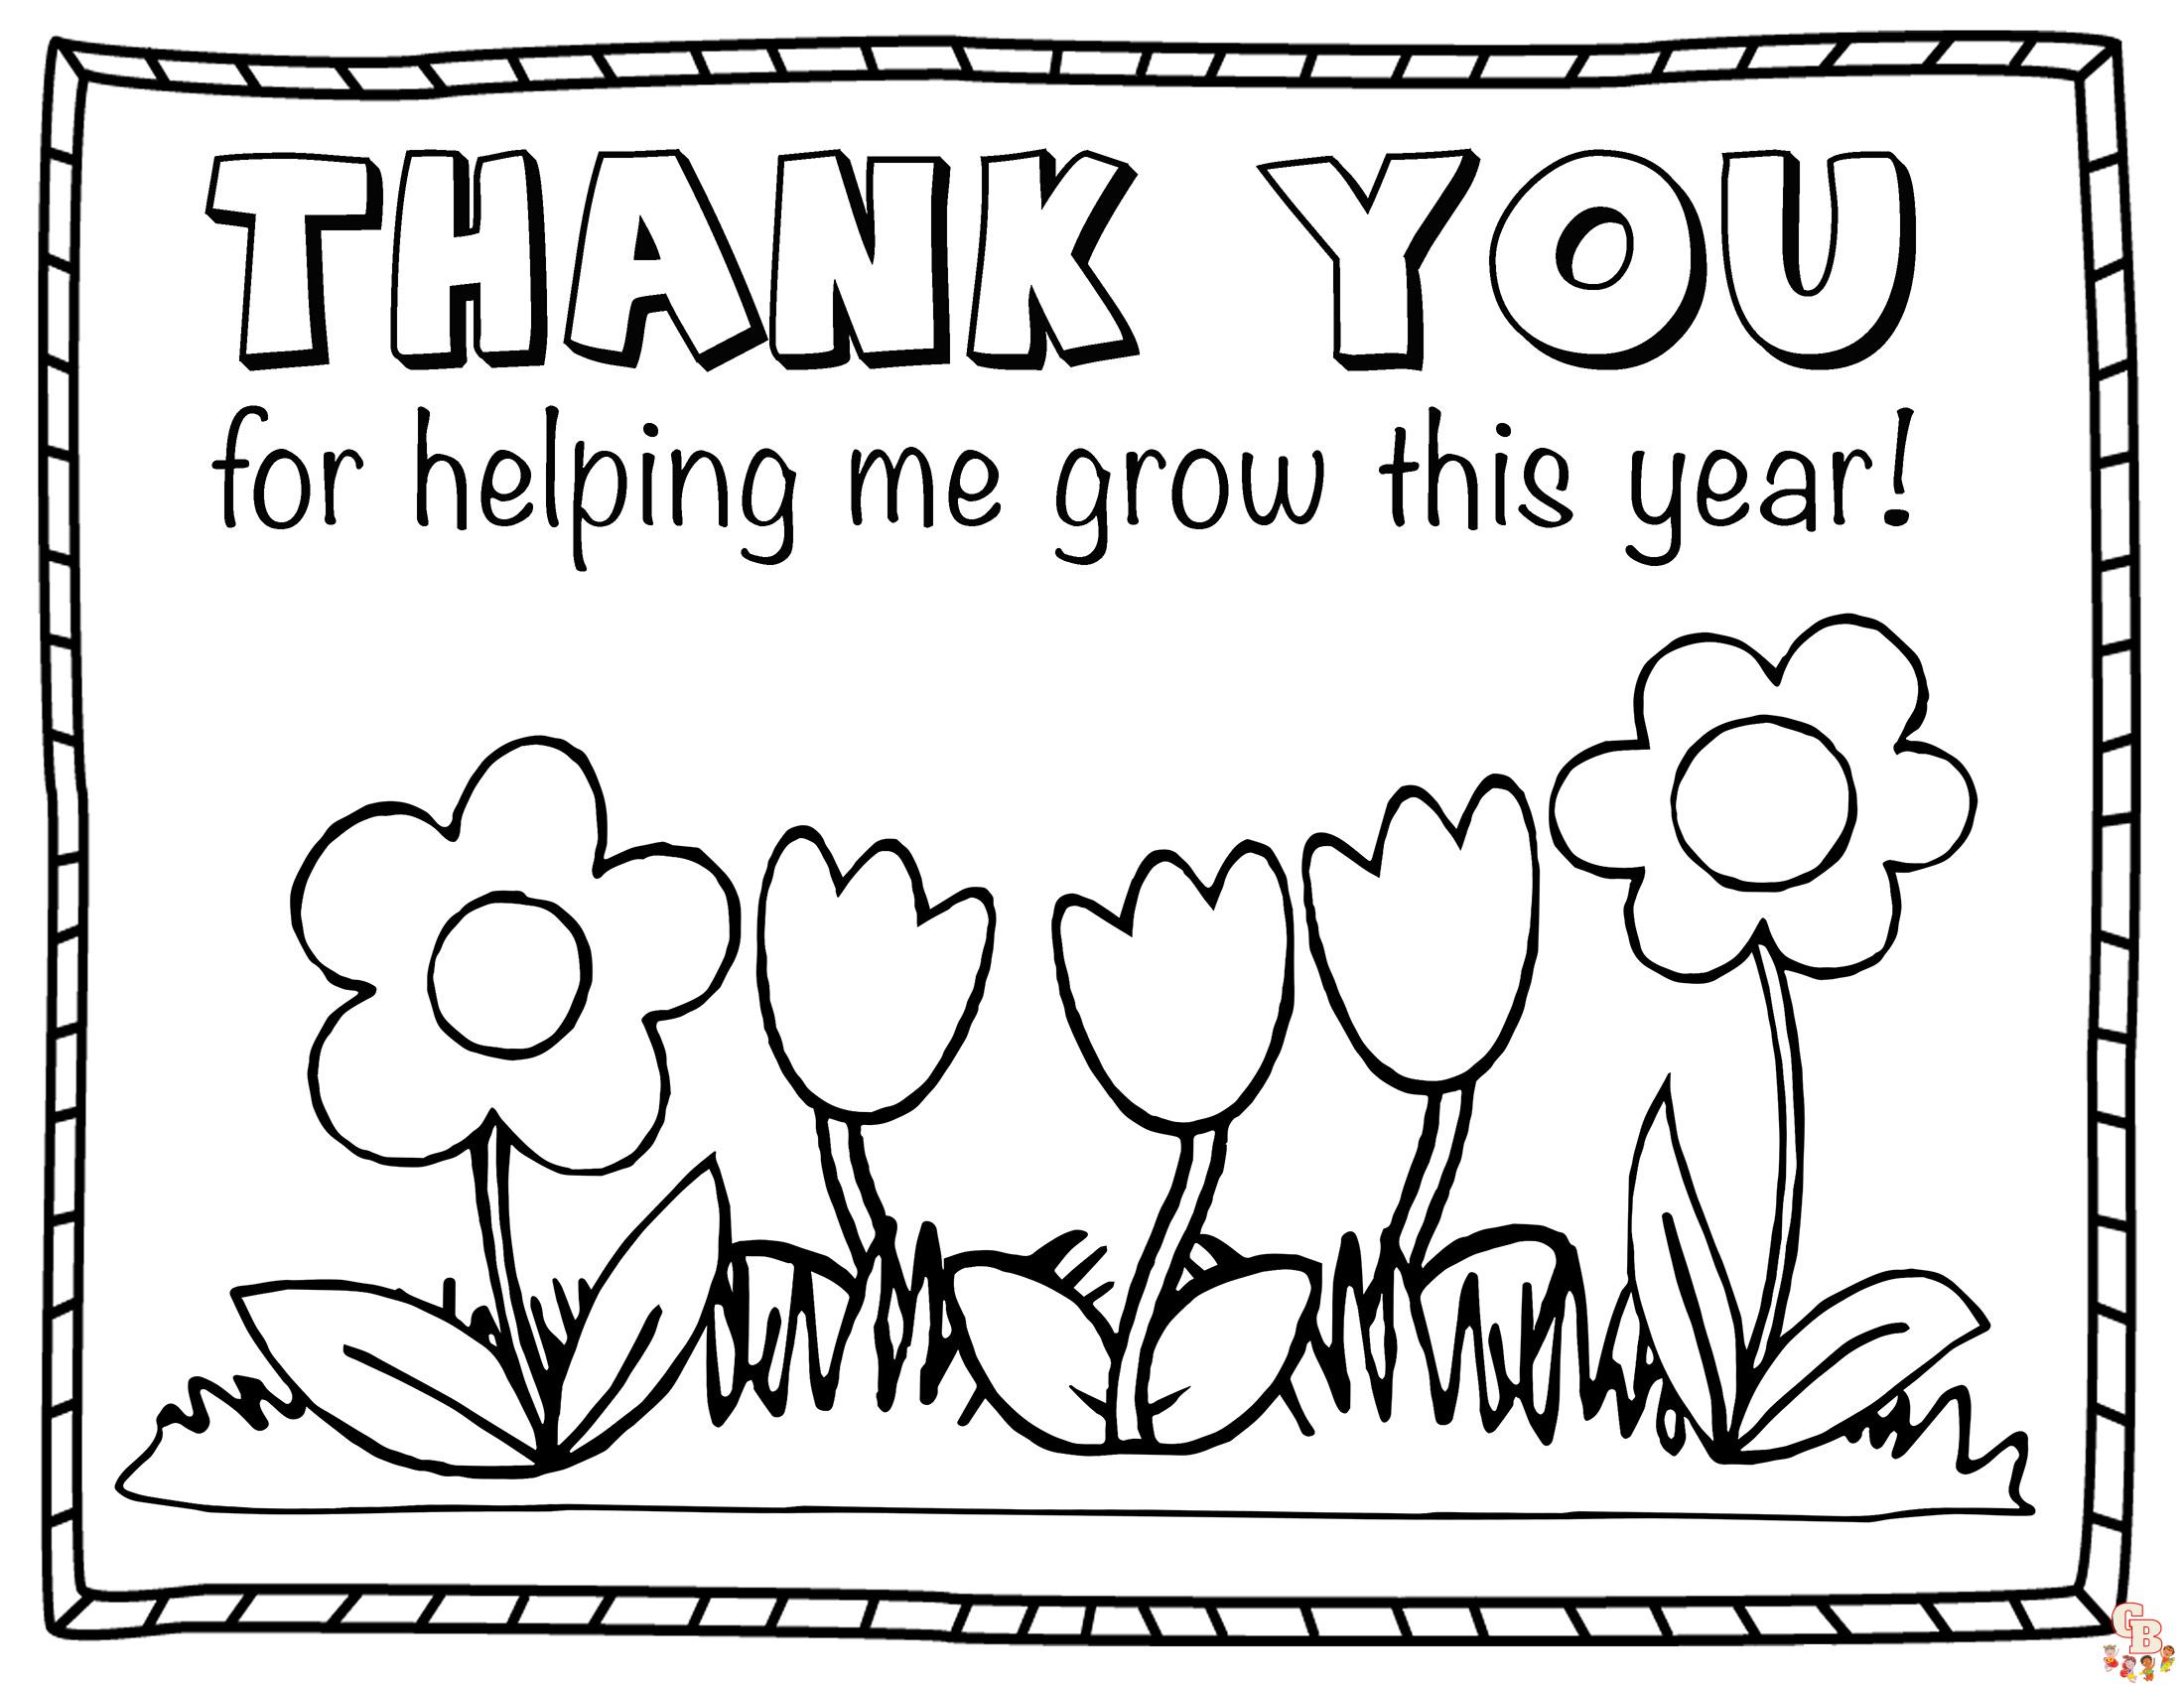 Thank You Coloring Pages